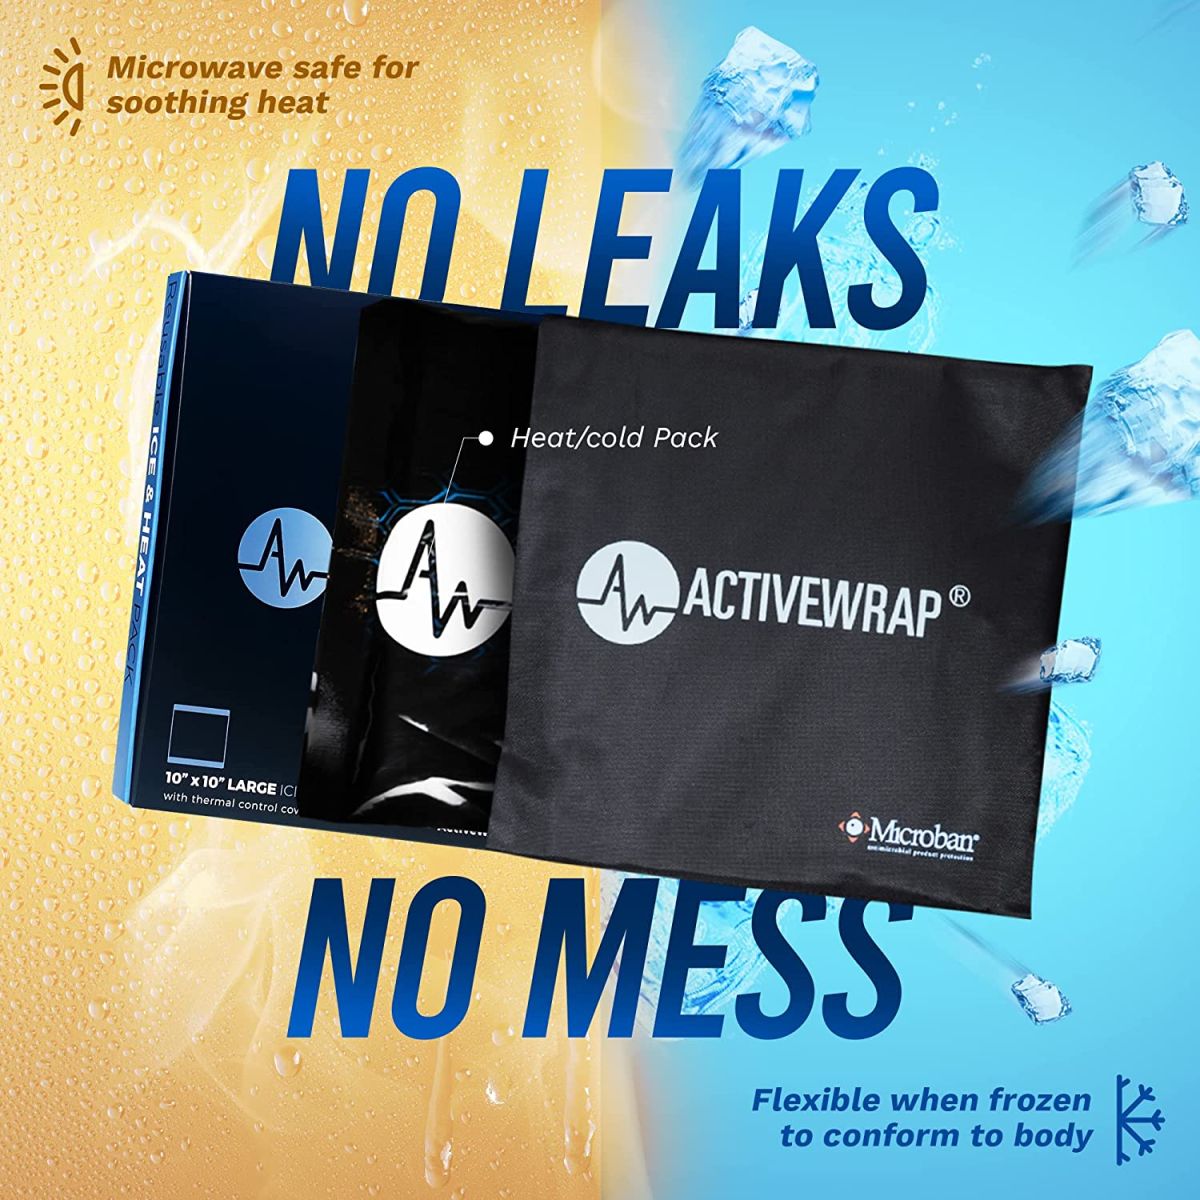 ActiveWrap Shoulder Ice Pack Wrap With Two Reusable Hot & Cold Packs - Rotator Cuff Ice Therapy